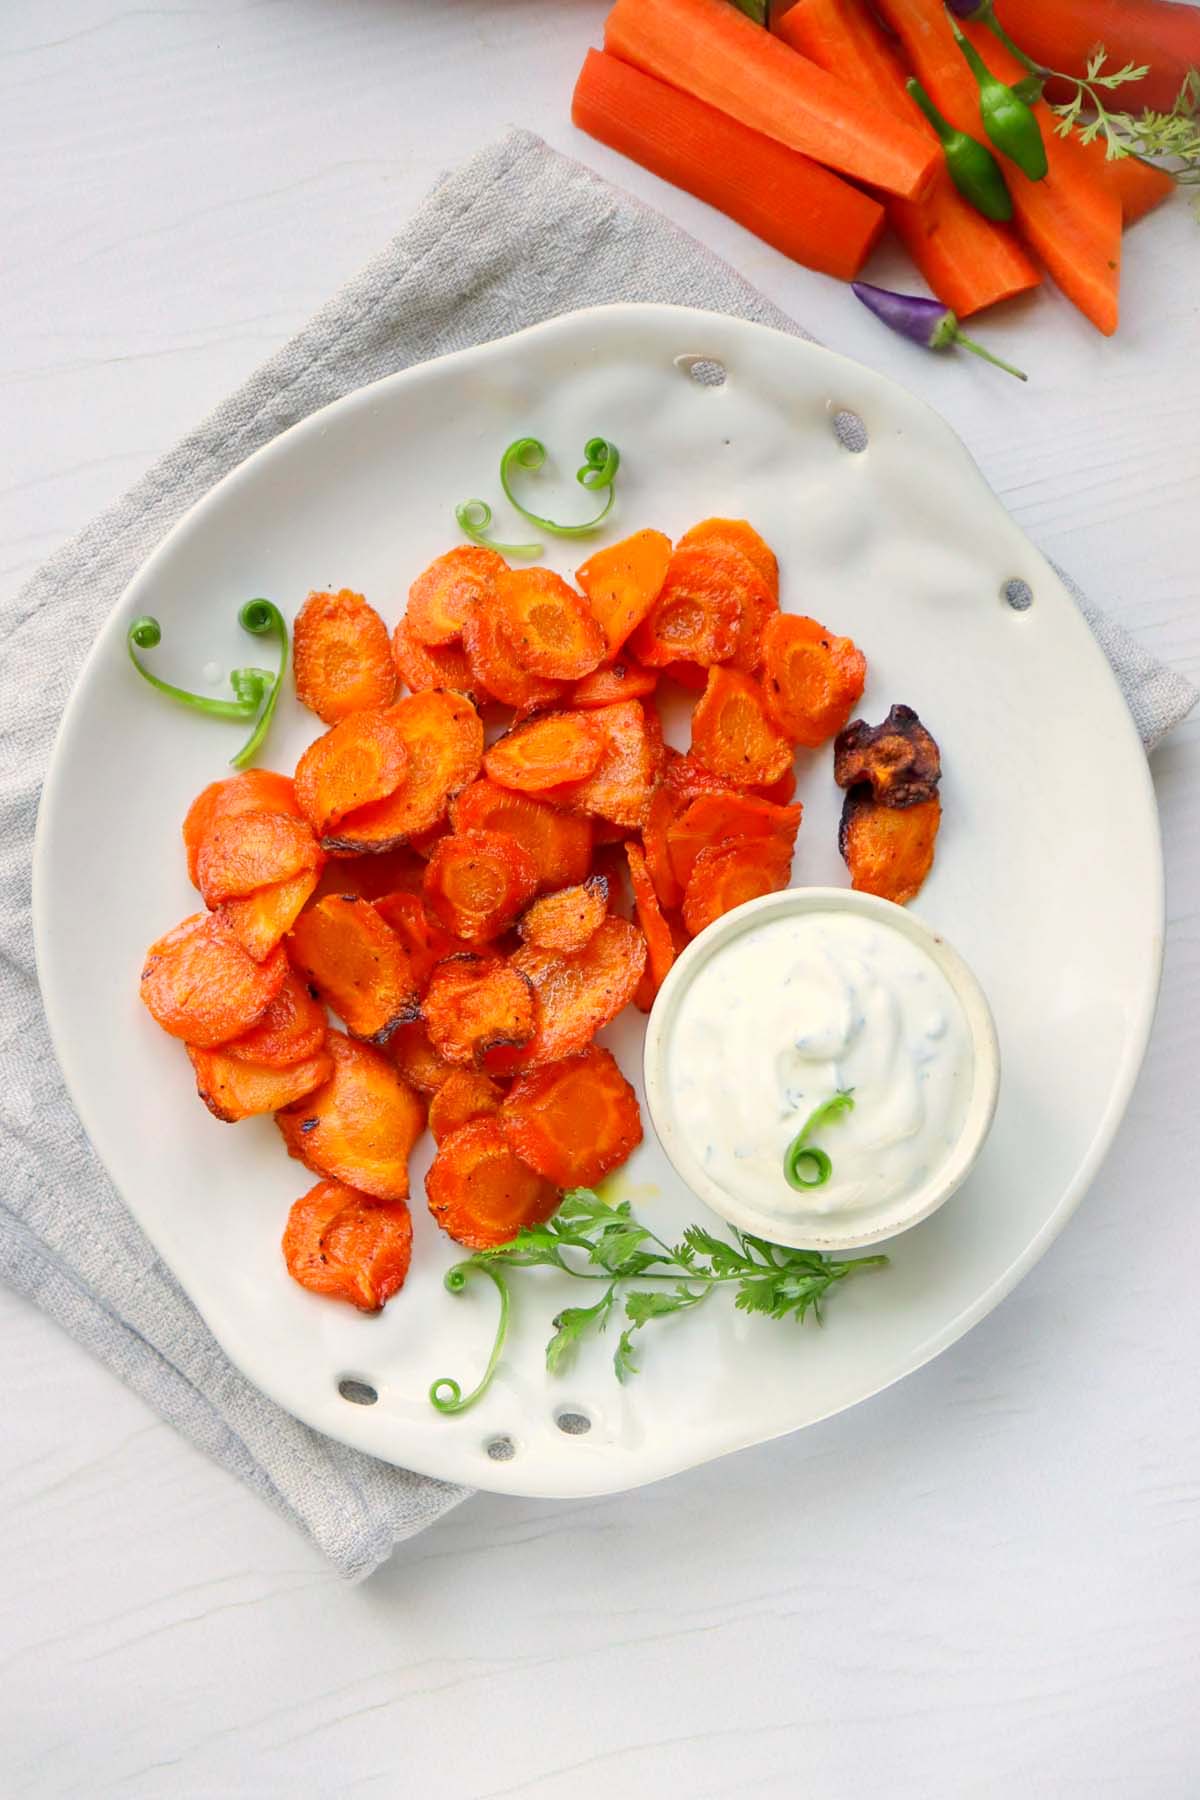 Carrot chips on a plate set on a kitchen towel.